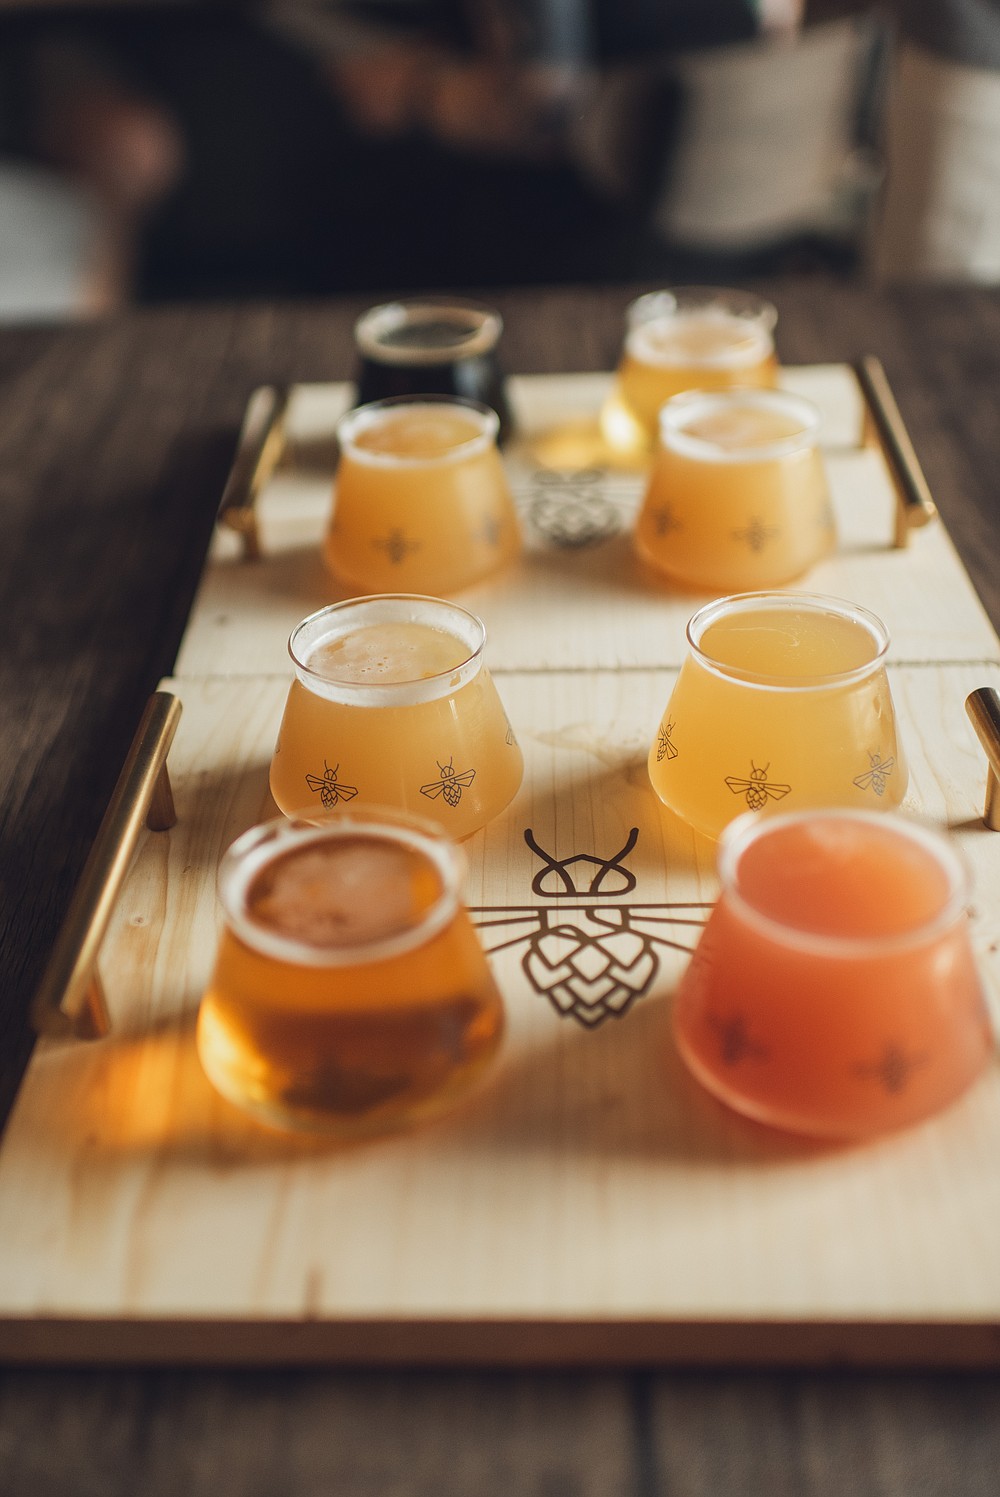 social project brewing flight of beers in bee designed cups